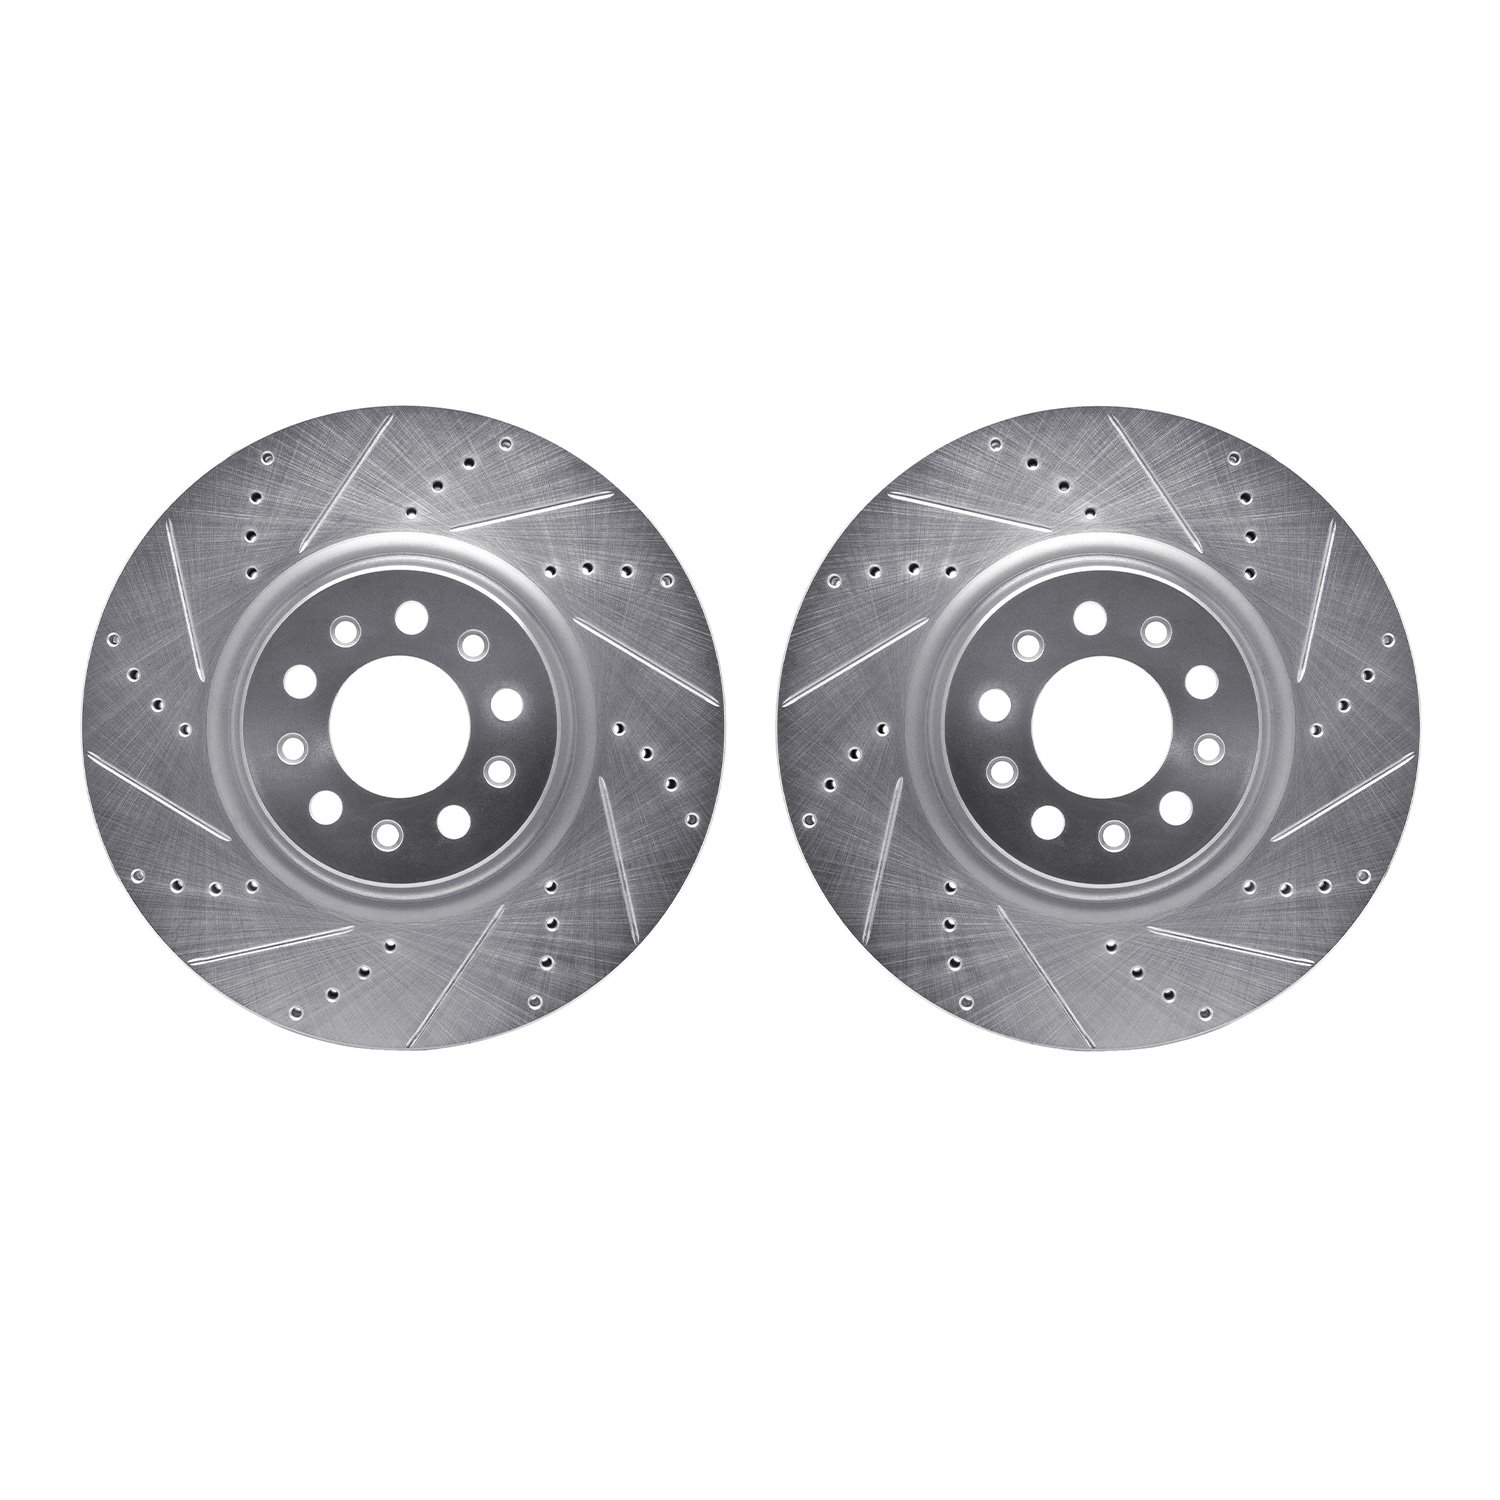 7002-42003 Drilled/Slotted Brake Rotors [Silver], Fits Select Mopar, Position: Front